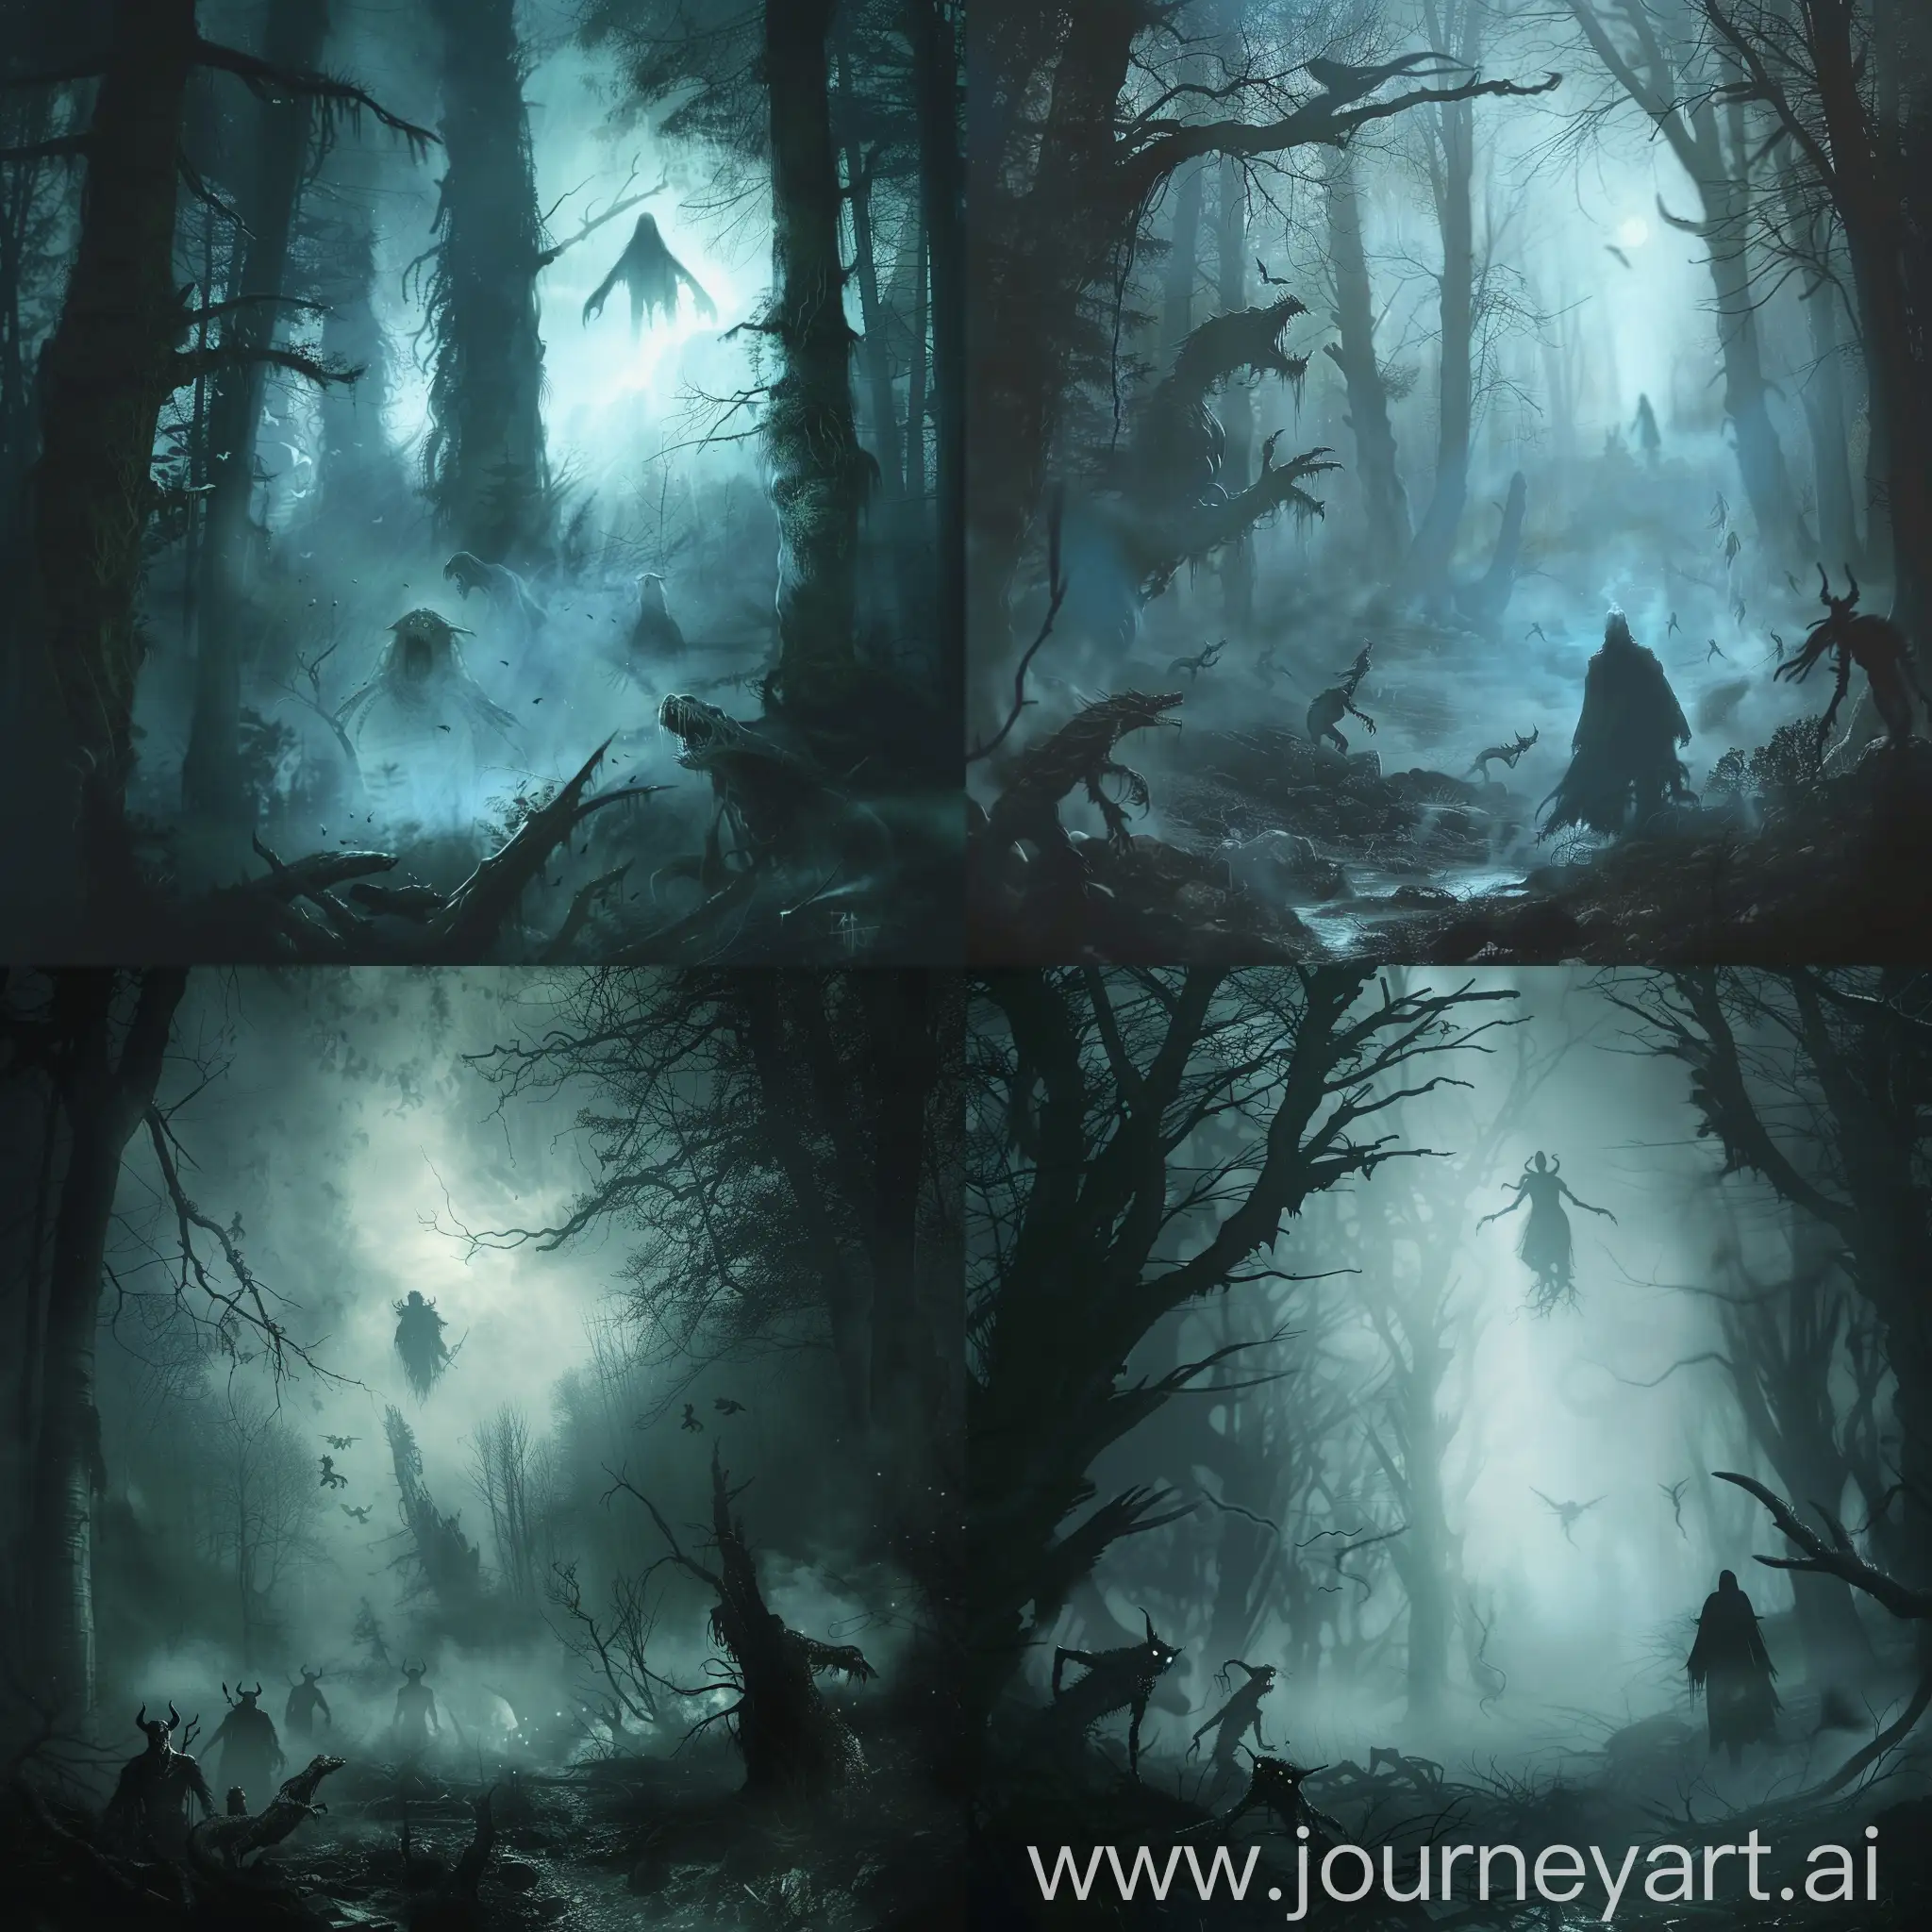 A dark foggy forest with monsters around and a sinister looking figure in the distance levitating